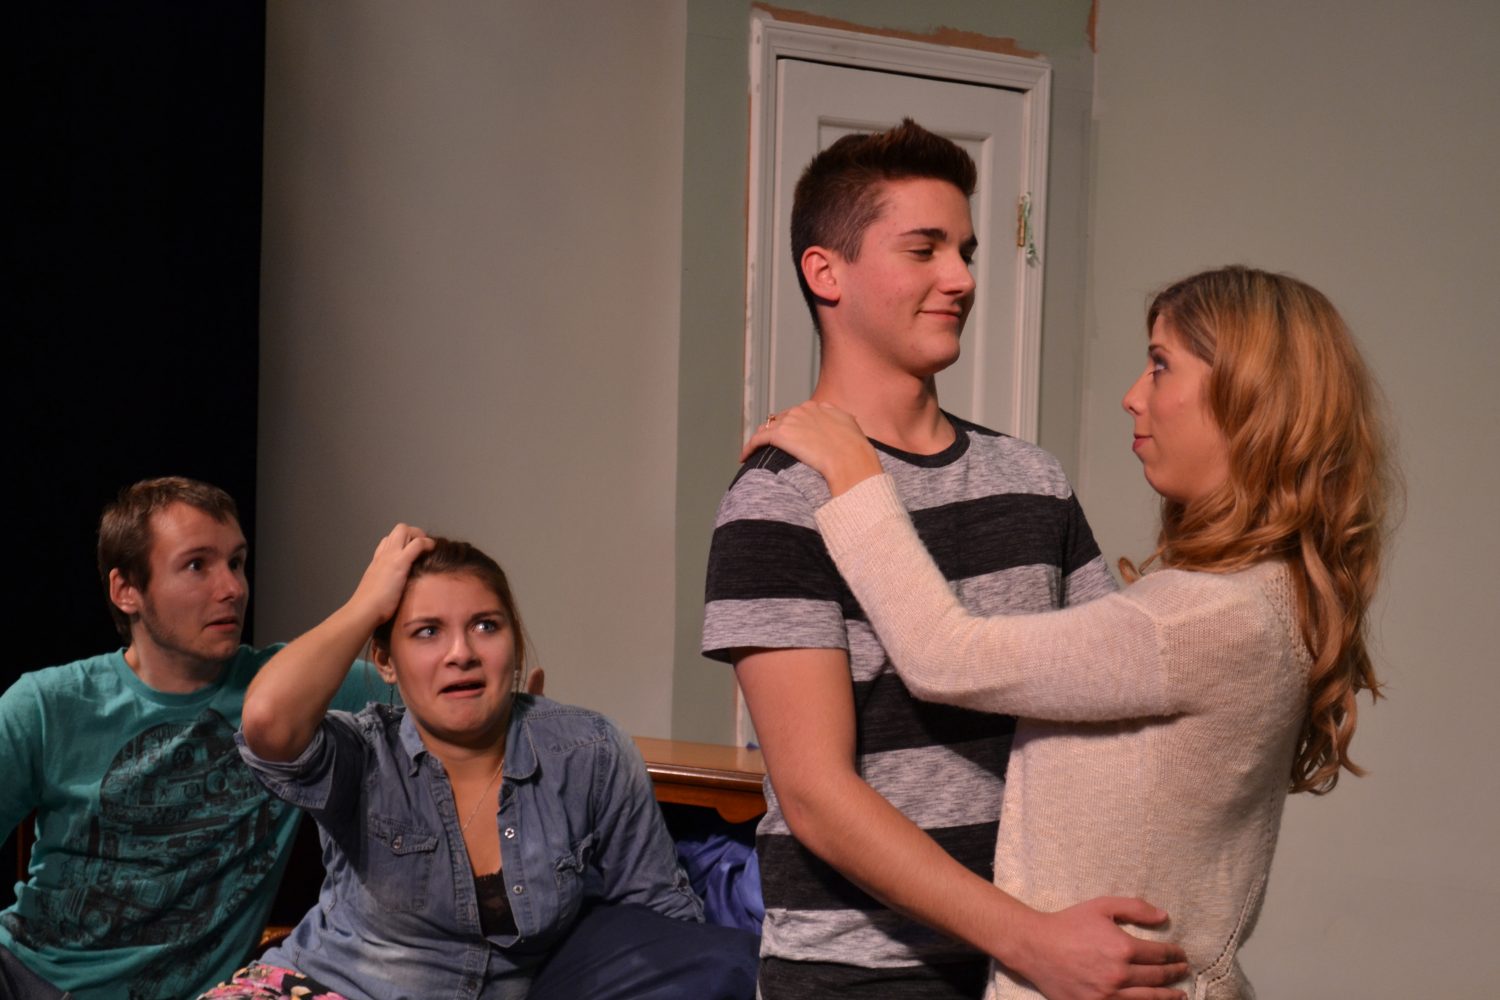 From left: Zachary Gotz and Bridget Donahue look on in shock as Marshall Van Over and Jillian Jackan reconcile after a fight in Bedroom Farce, the upcoming comedy to be presented at UW-Marshfield/Wood County.